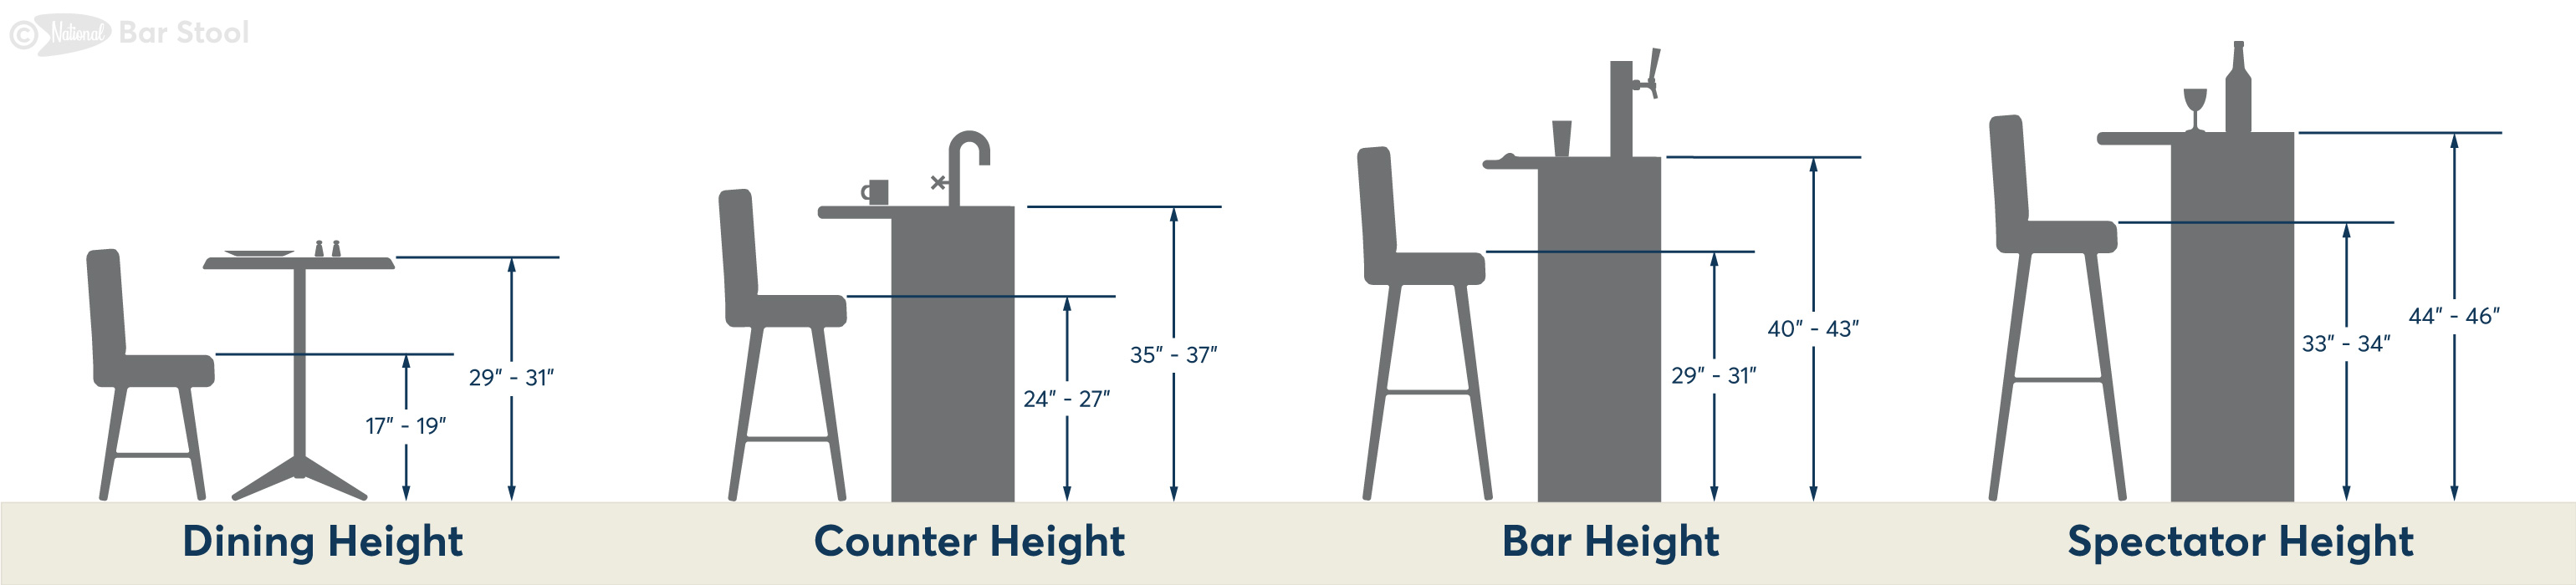 Bar Stool Ing Guide National, What Is Counter Bar Stool Height